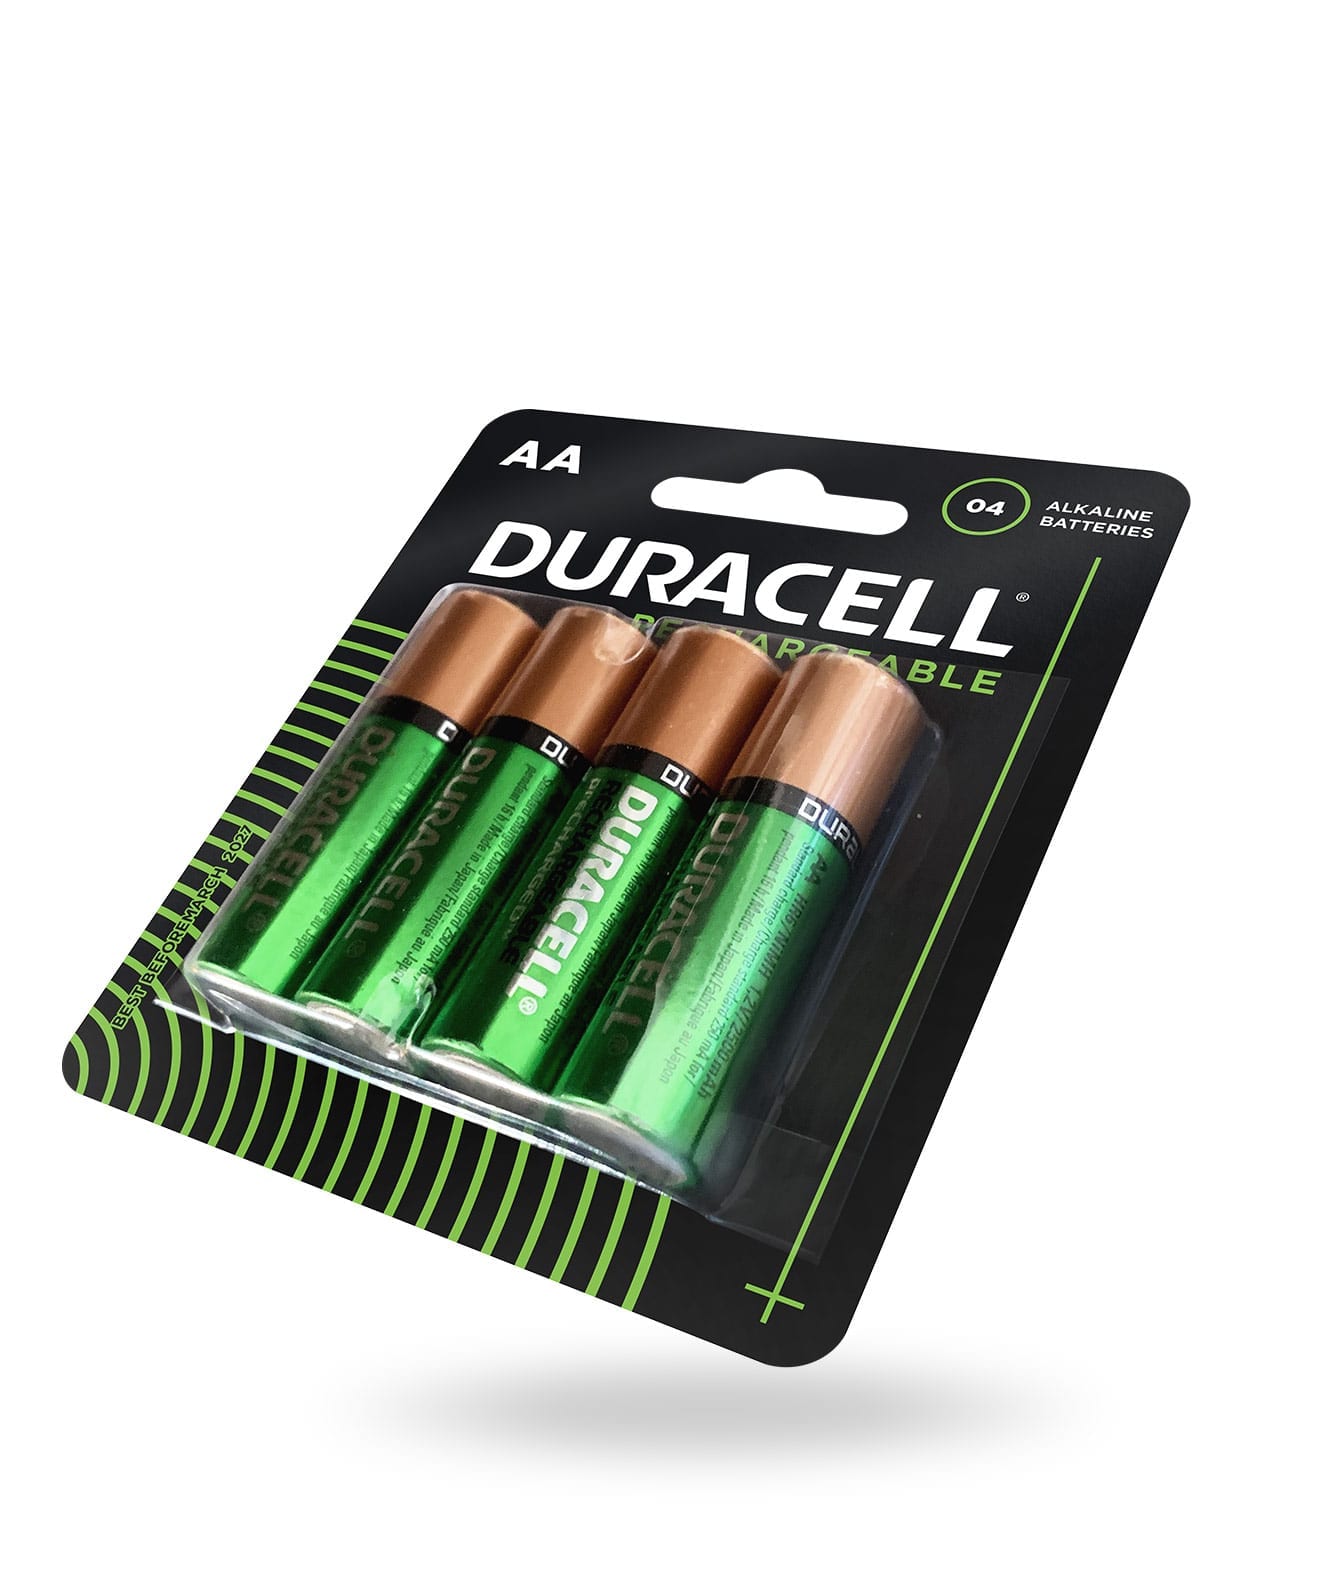 duracell green package design